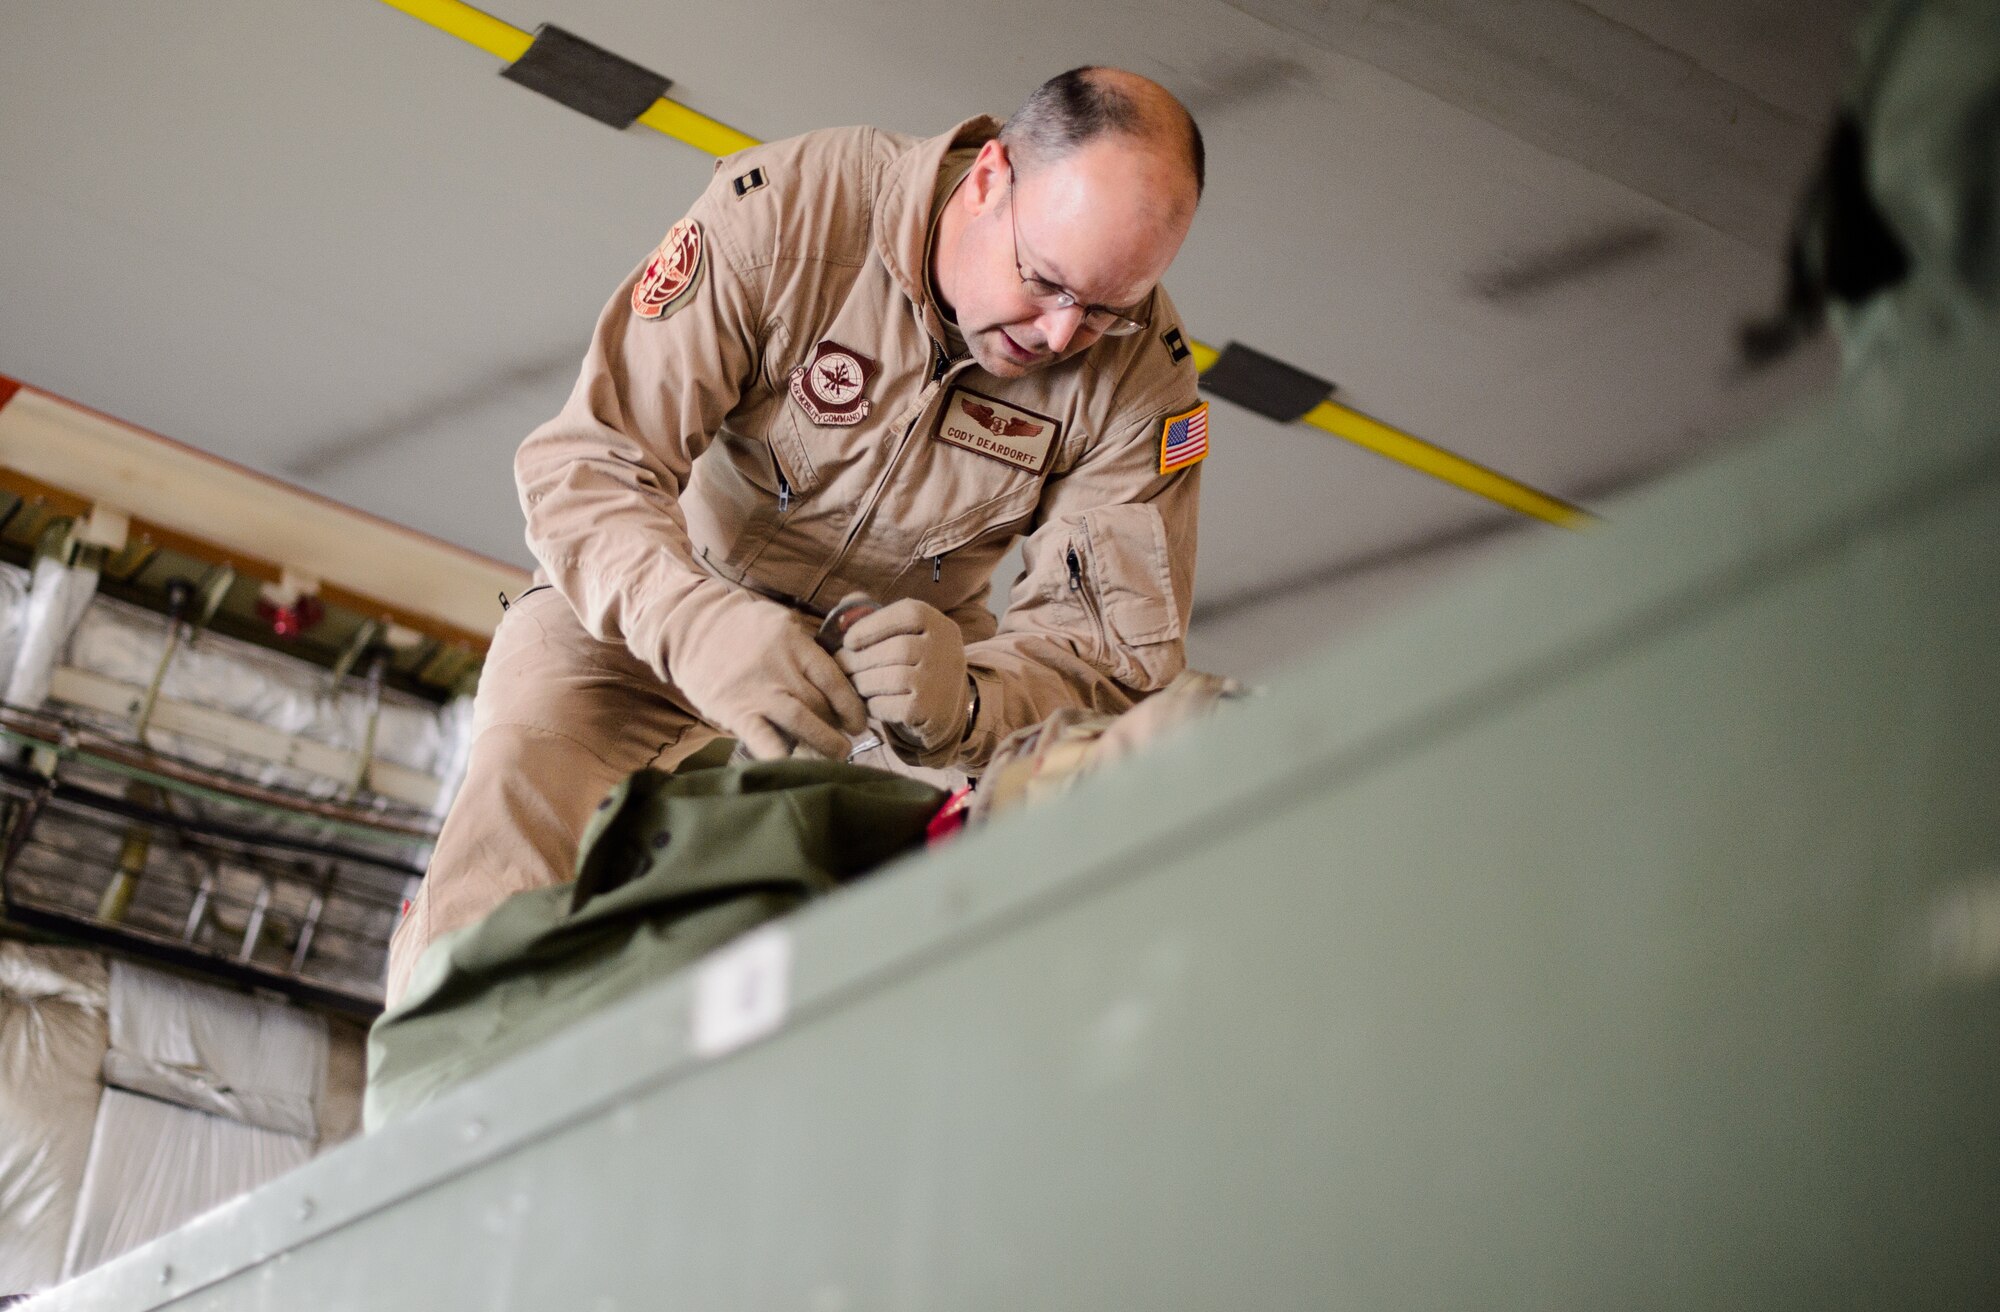 Capt. Cody Deardorff, 10th Expeditionary Aeromedical Evacuation Flight nurse, ties down bags inside of a C-17 Globemaster III Nov. 10, 2015, at Ramstein Air Base, Germany. Deardorff and several other medical personnel helped to save more than 2,500 lives through aeromedical evacuation this year. (U.S. Air Force photo/Staff Sgt. Armando A. Schwier-Morales)